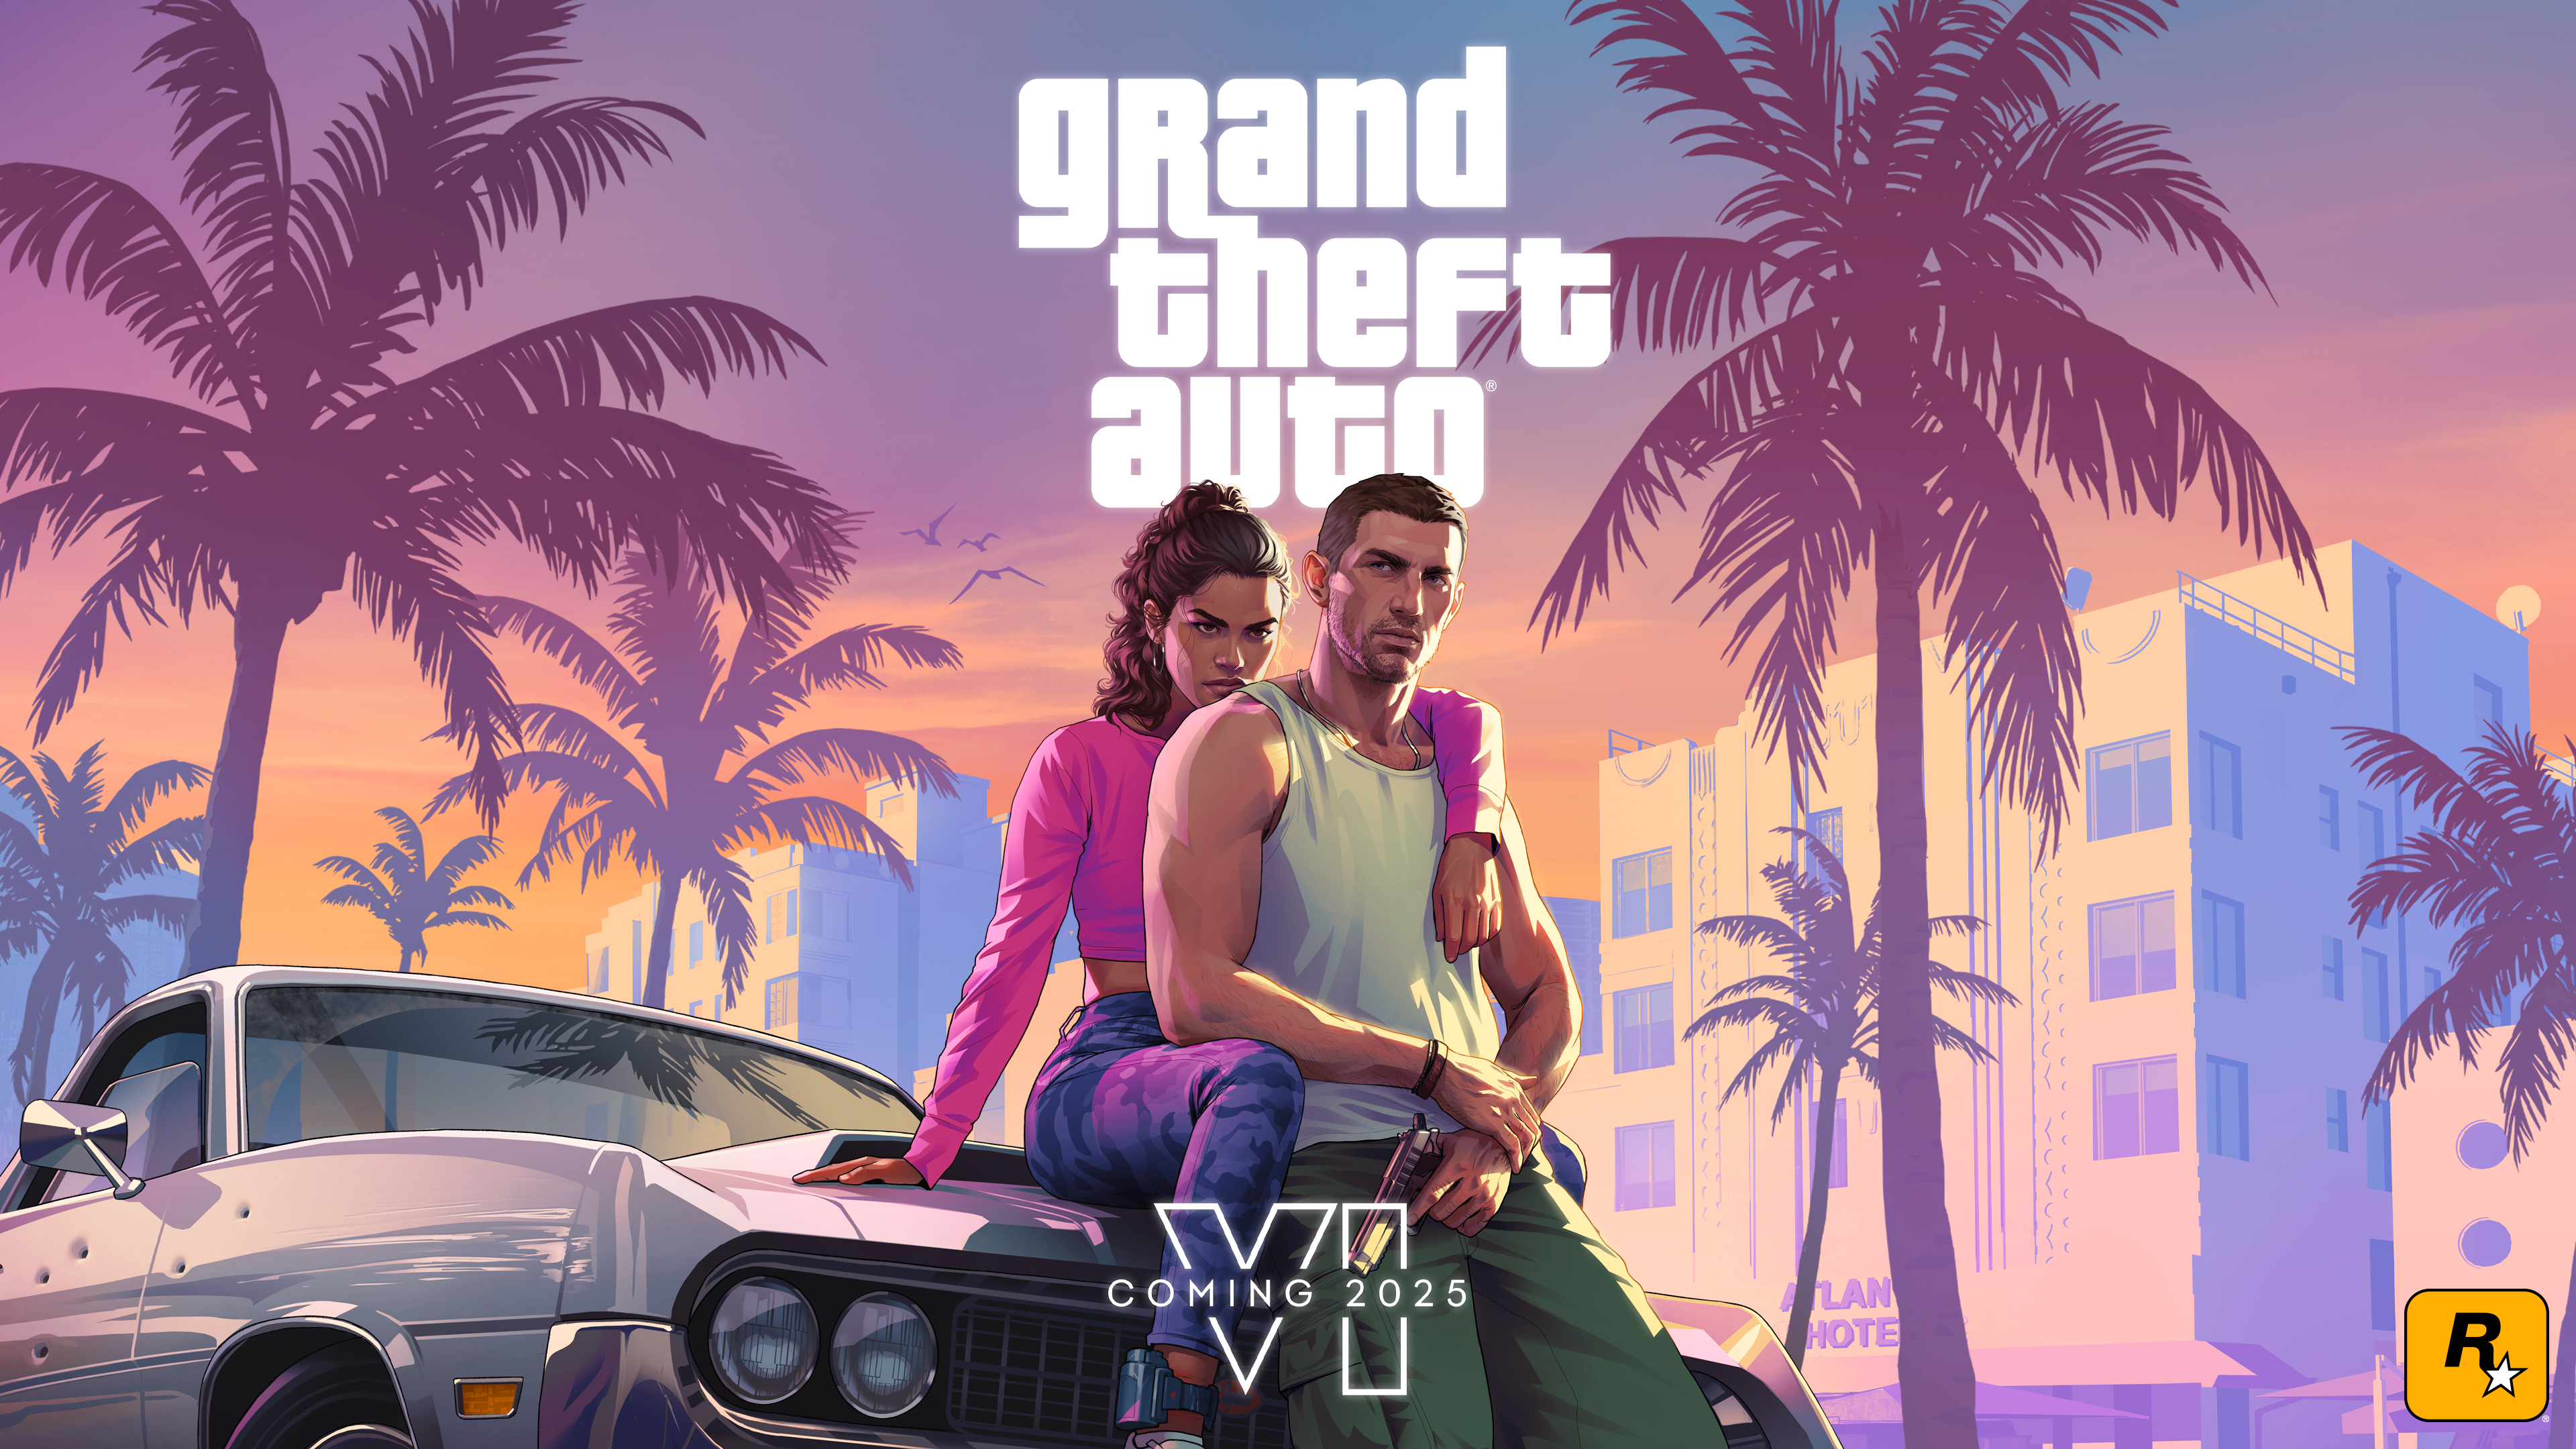 General 3840x2160 Rockstar Games couple car vehicle women men video game art palm trees sitting birds sky curly hair building reflection pistol Grand Theft Auto bullet holes video games Grand Theft Auto VI gun artwork boys with guns video game characters logo 2025 (year) sunset glow closed mouth ponytail sleeveless Miami Vice City digital art